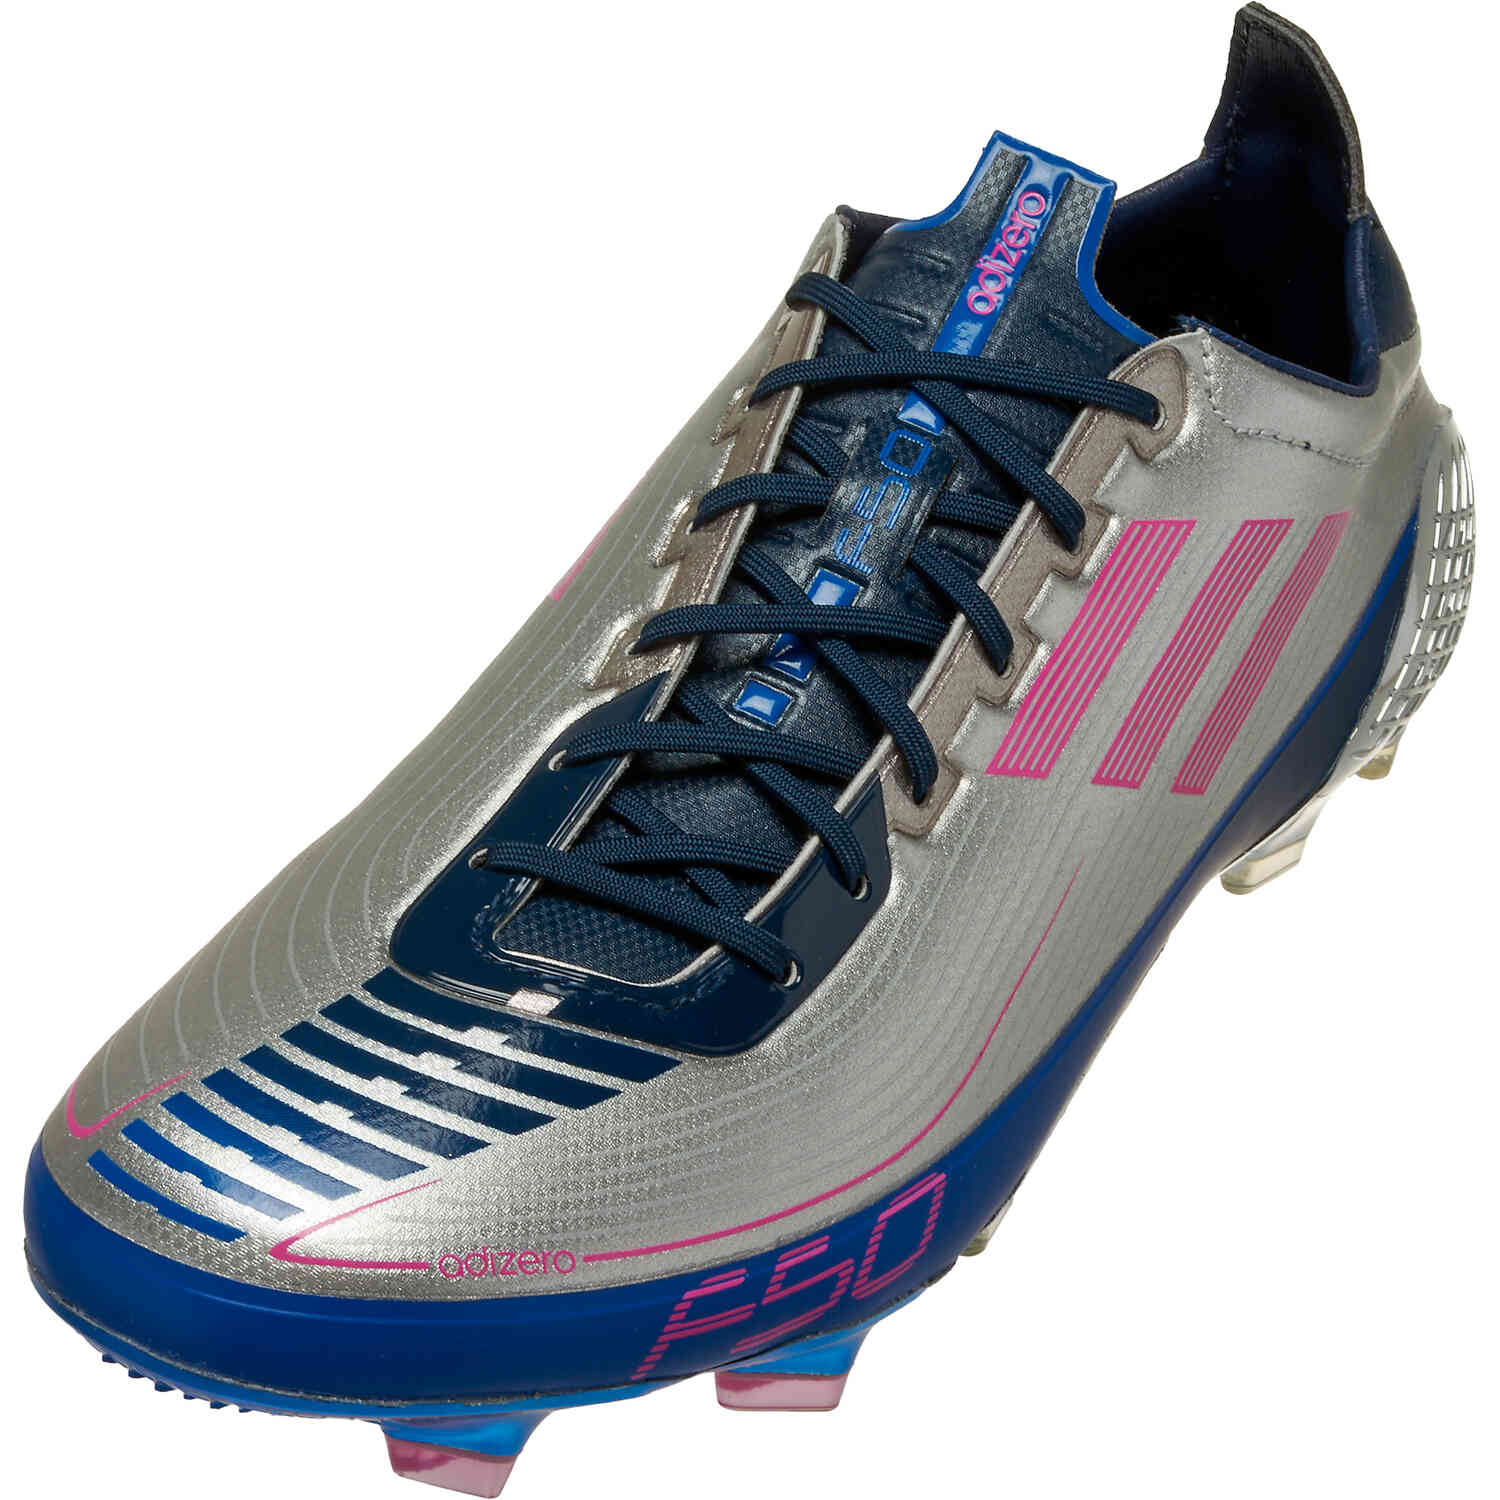 adidas F50 Ghosted UCL FG - Metallic Silver & Shock Pink with Navy